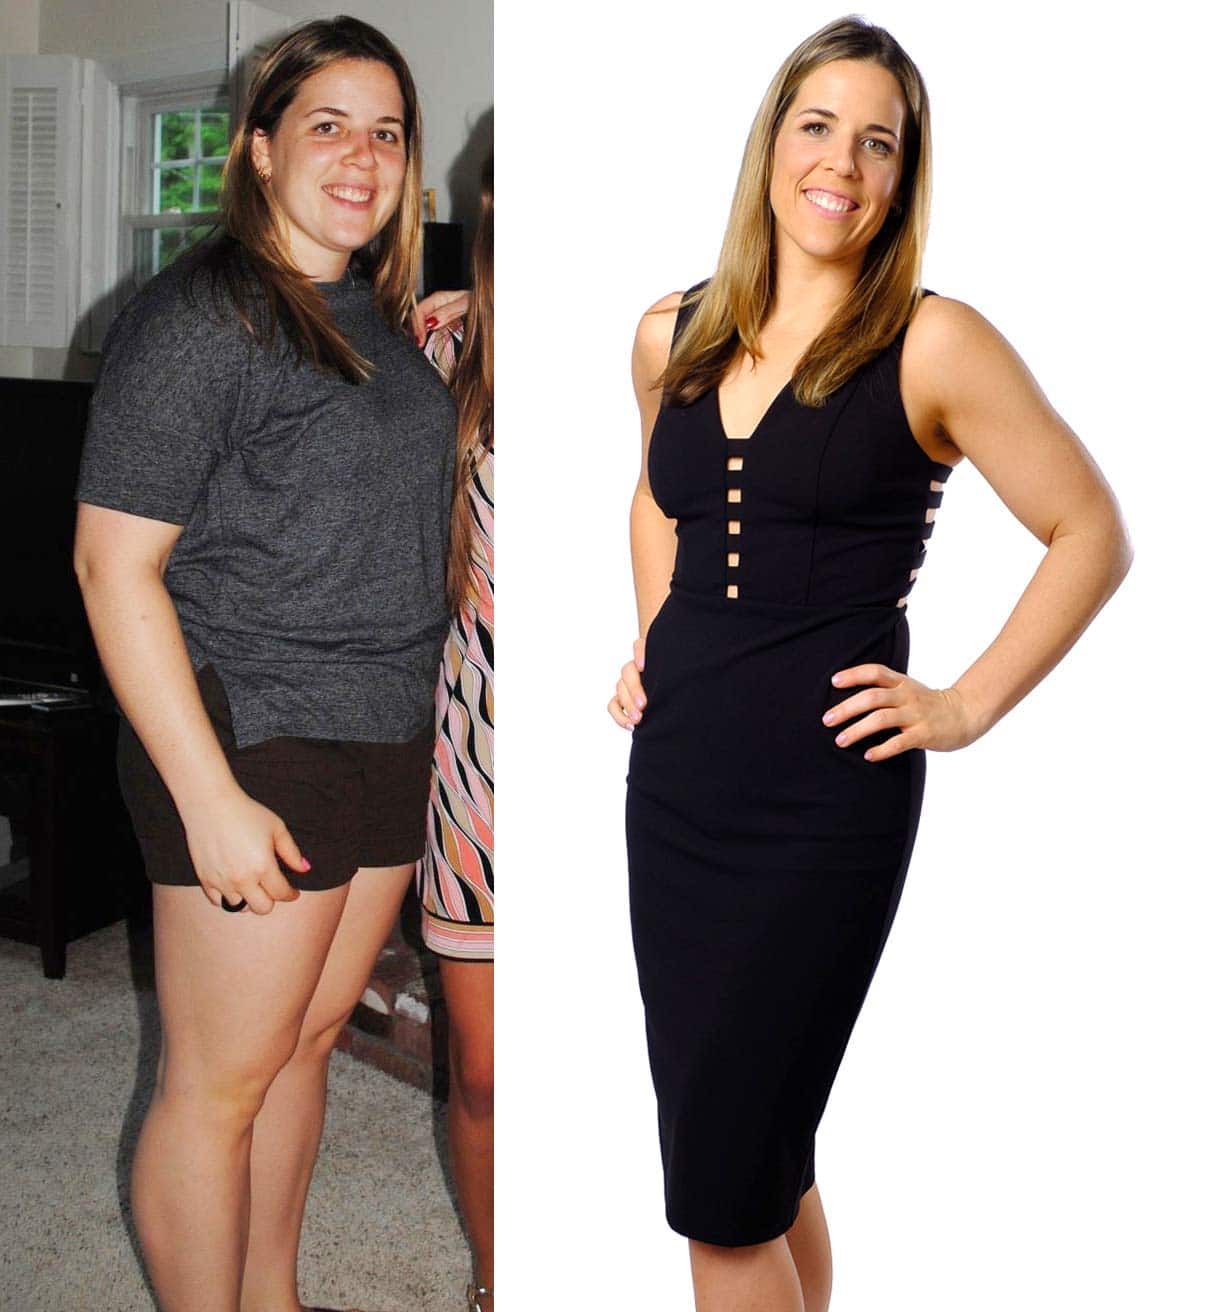 Michelle D'Amico made an incredible fit body 50 pound weight loss and ...